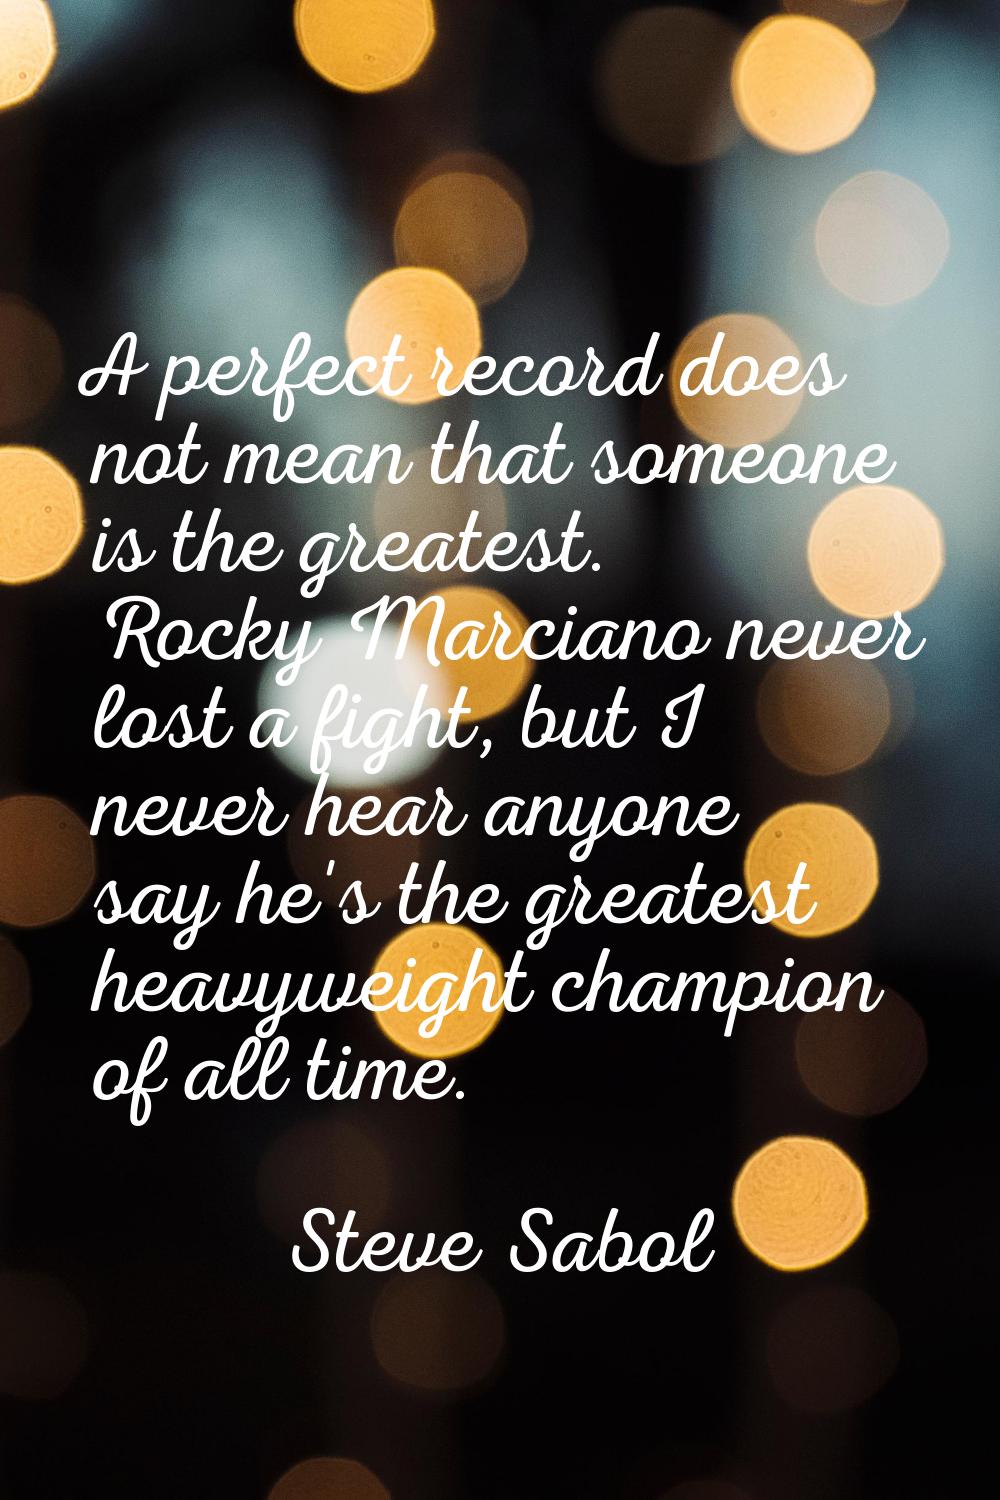 A perfect record does not mean that someone is the greatest. Rocky Marciano never lost a fight, but